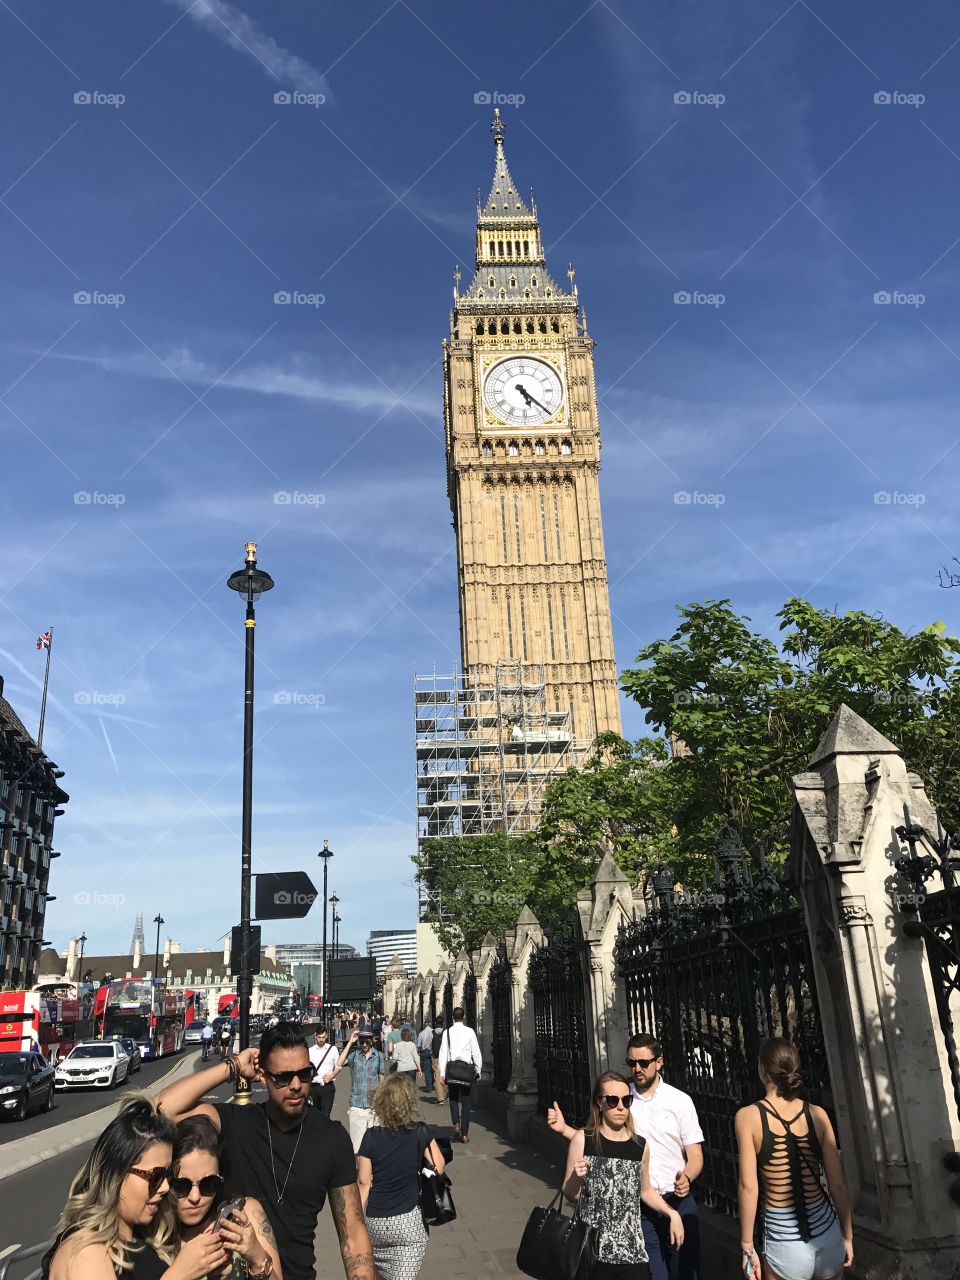 Outdoors, Travel, People, Architecture, Parliament